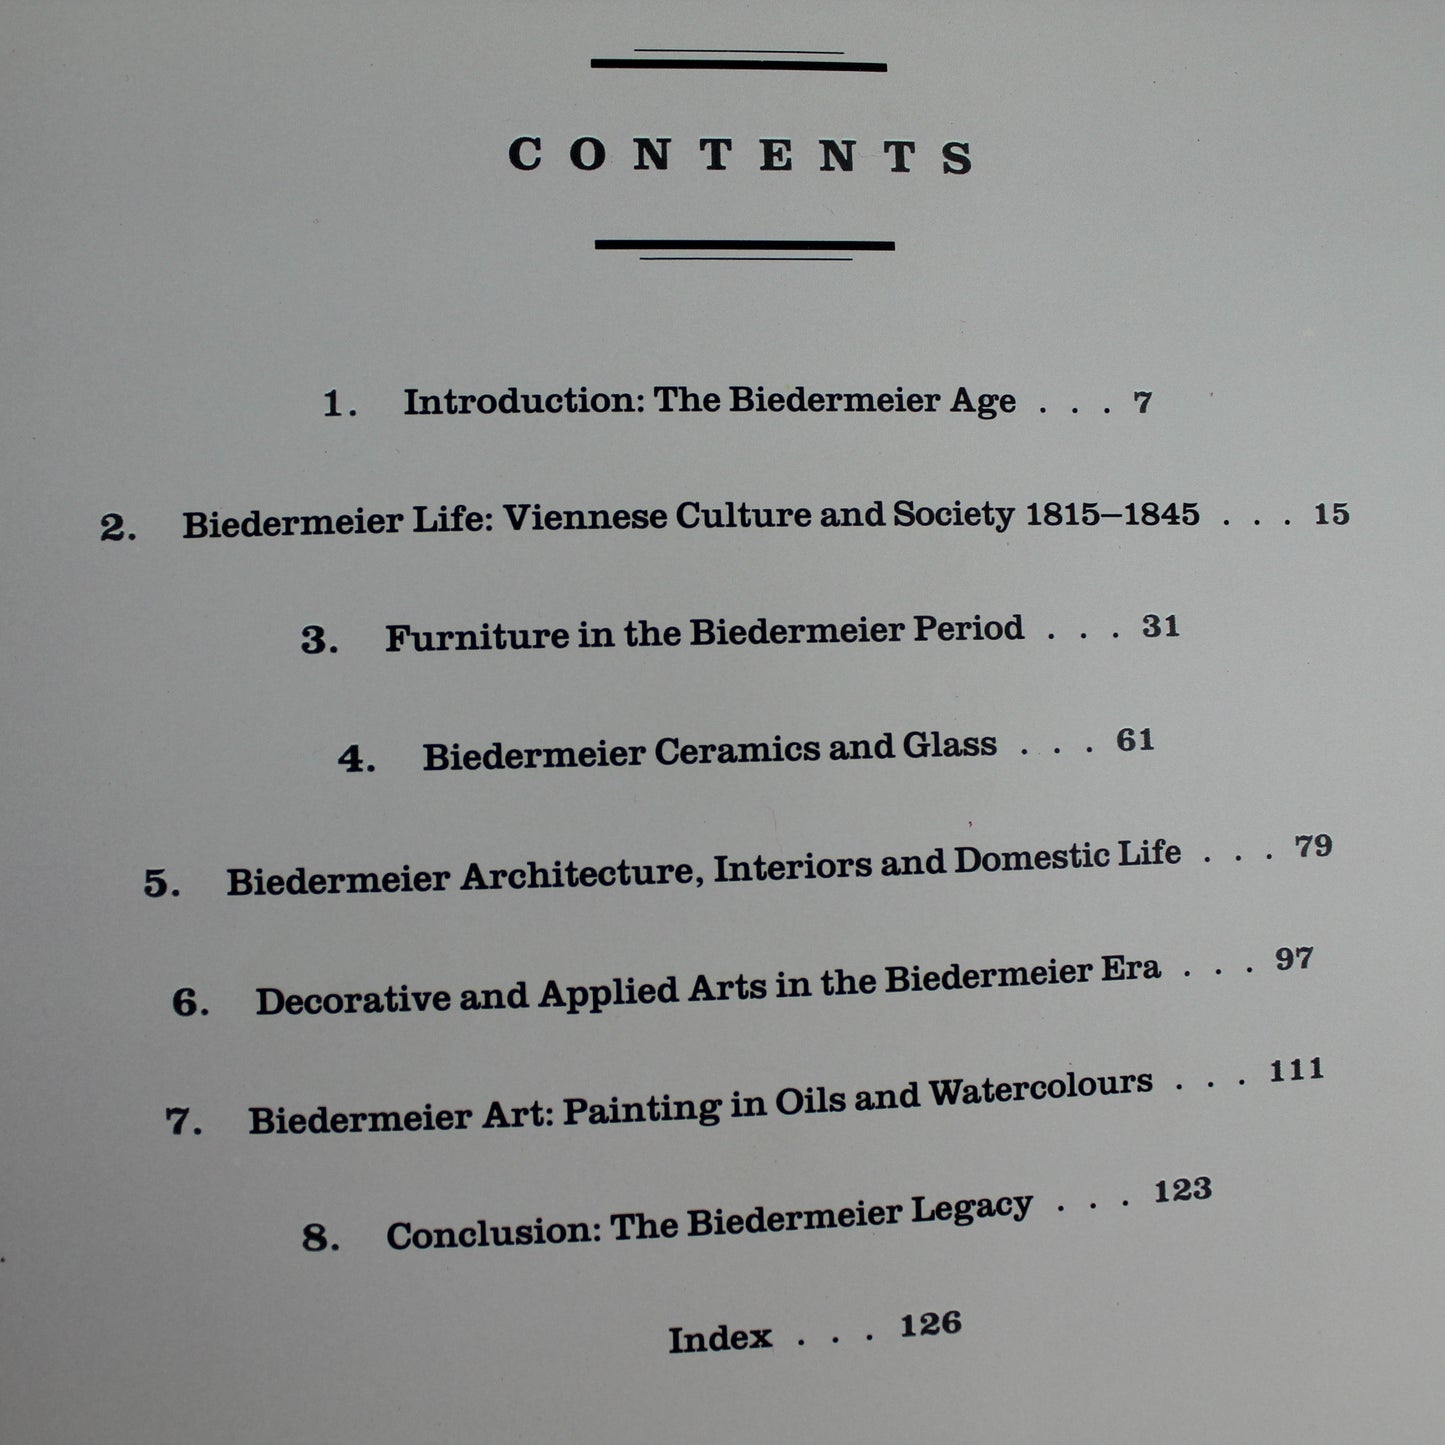 Collection 2 Interior Design Books Biedermeier & Victorian Dom Stone & Jim Kemp good contents, see pages